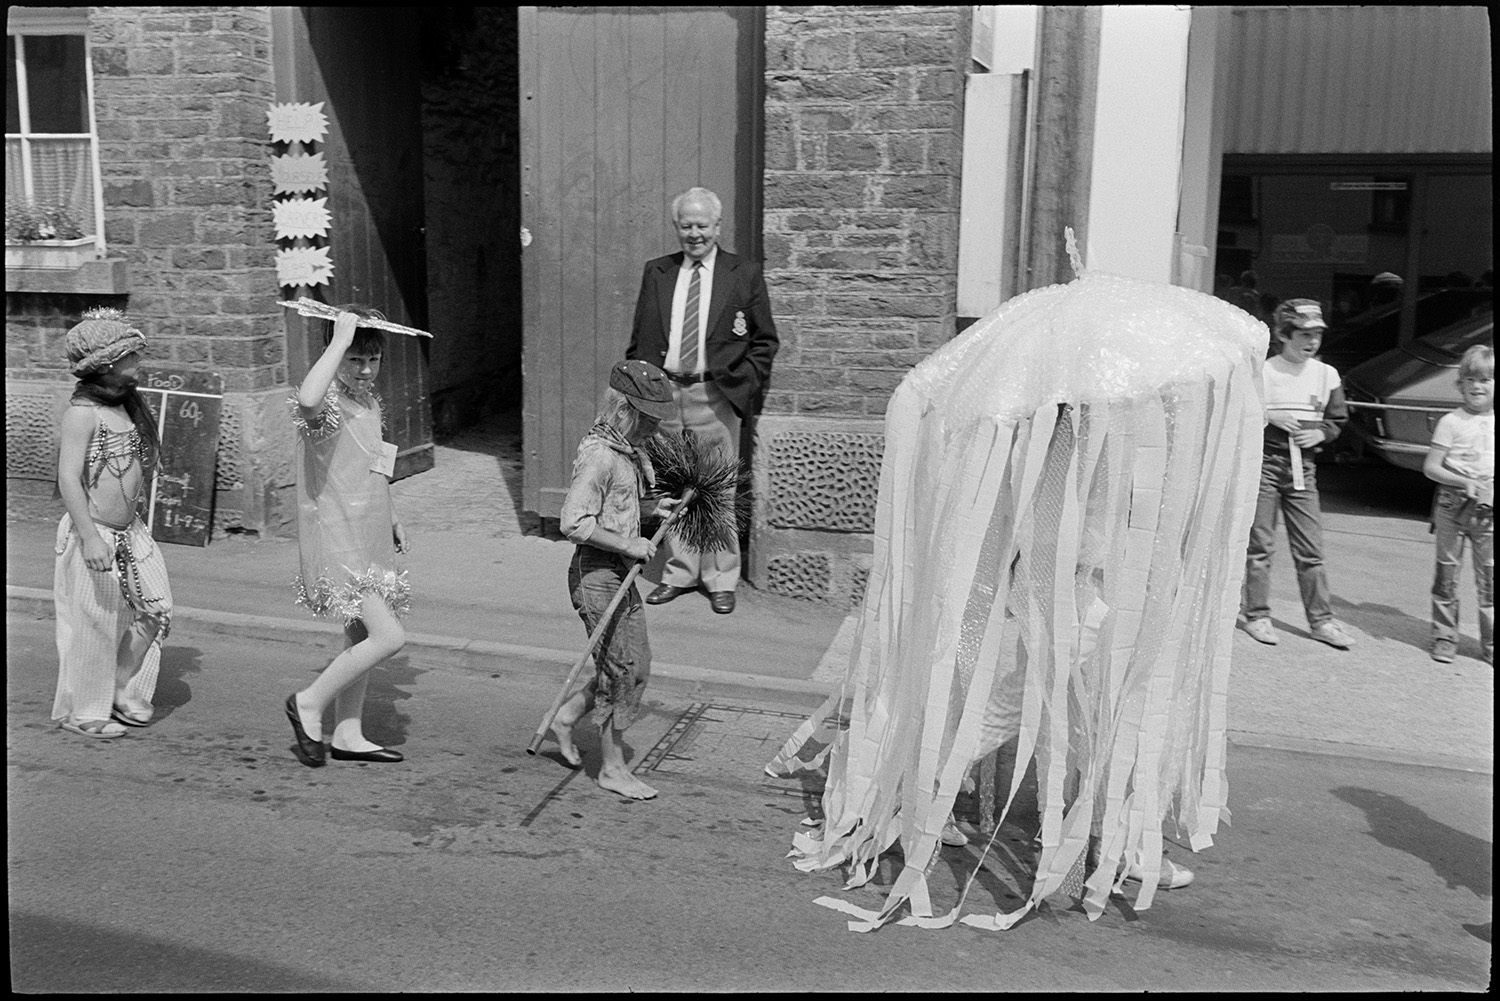 Procession, Queen and attendants parading , fancy dress prizes women spectators laughing !
[Children in fancy dress parading down a street past a man and children watching the Chulmleigh Fair procession. One child is dressed as a jellyfish and another is a chimney sweep.]